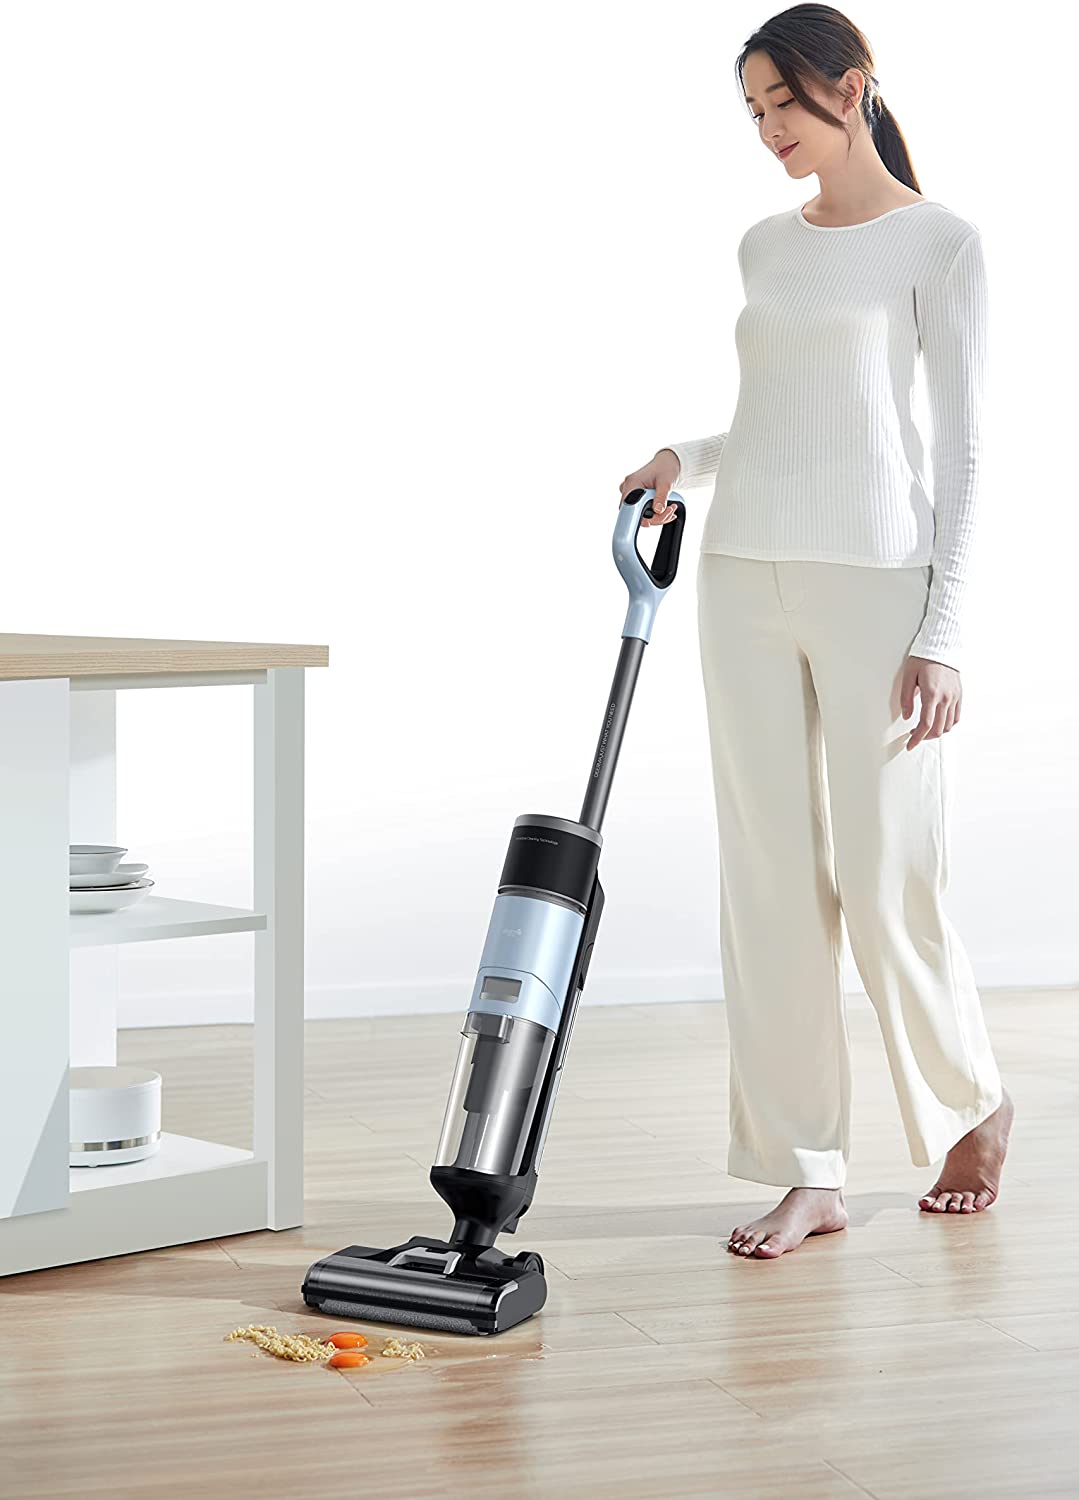 Deerma VX300 Water Suction Vacuum Floor Cleaner | Automatically Sense Dirt And Absorb Dry And Wet Garbage | Automaticaly Adjust The Suction Power | One-Button Self-Cleaning | Double Water Tanks- Black